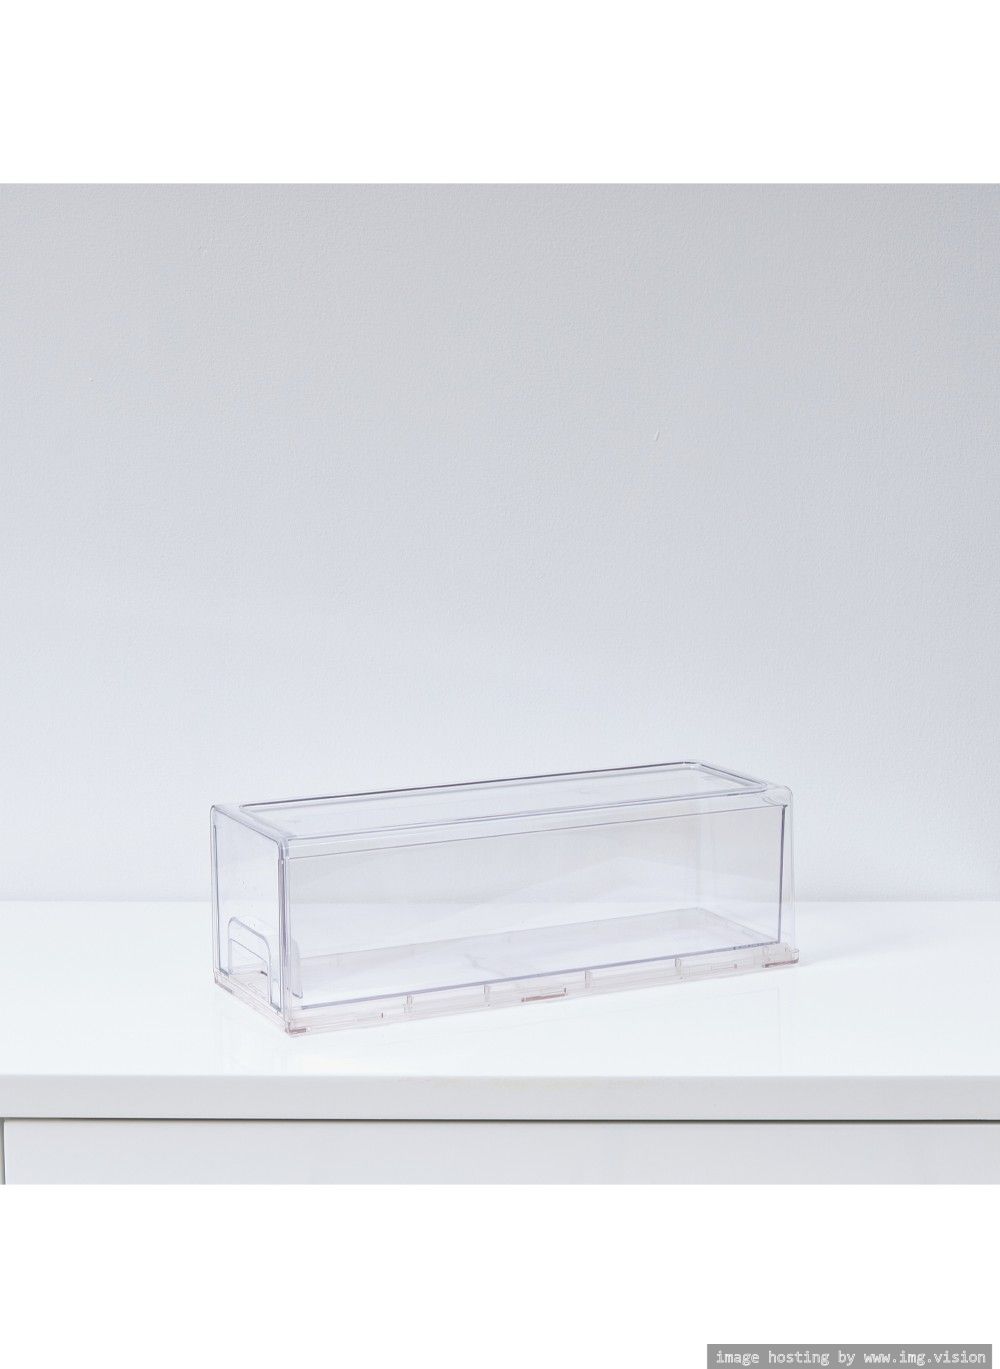 Homesmiths Stackable Storage Drawer Clear 33.7 x 12 x 11 cm Clear 0.5kg